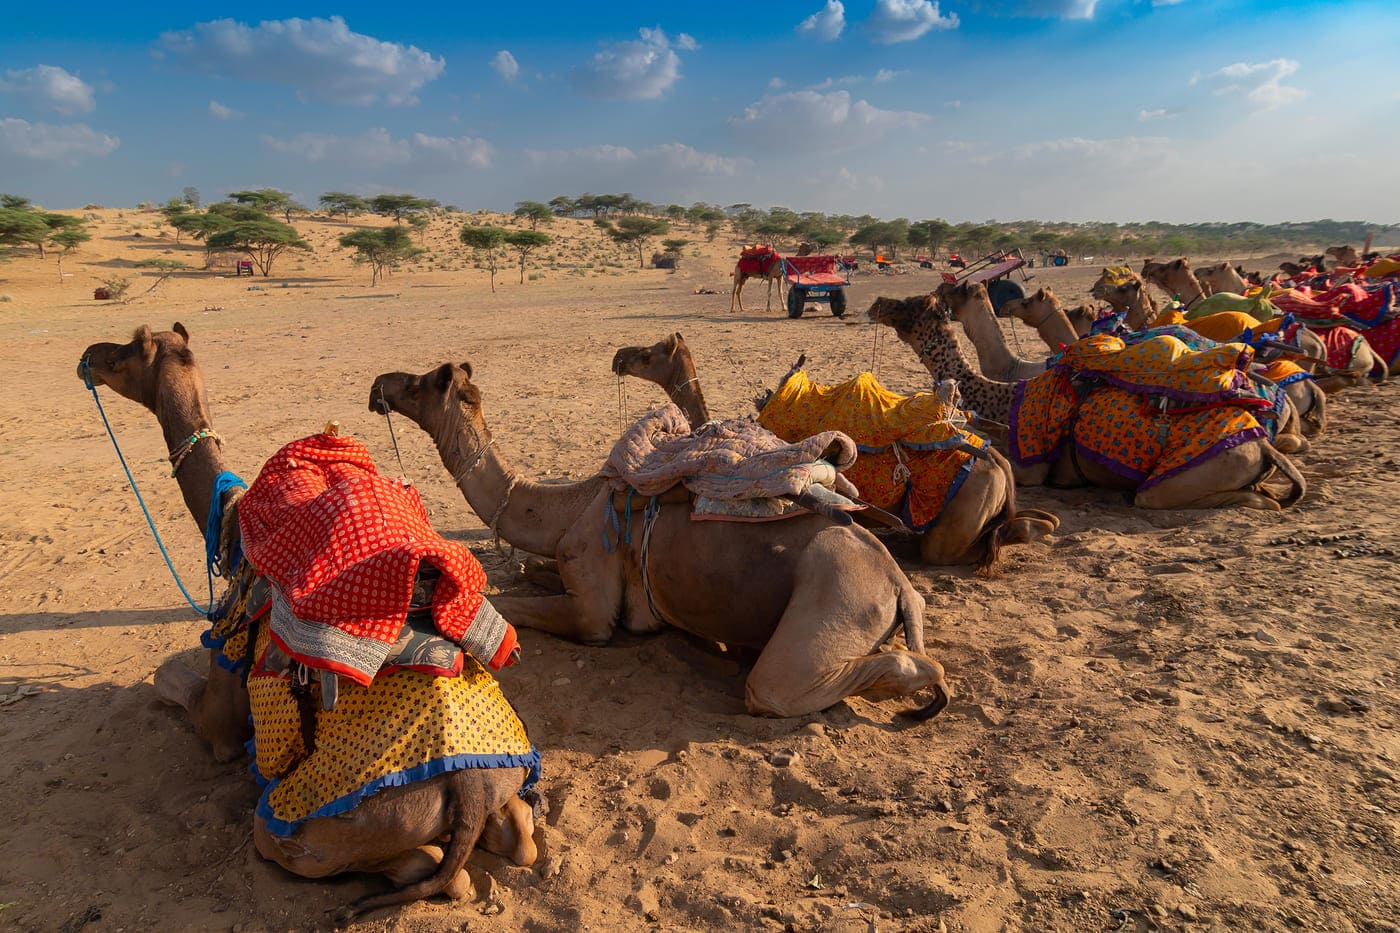 Camels in traditional attire wait in line for the arrival of tourists. Camel rides are a favorite activity amongst visitors 